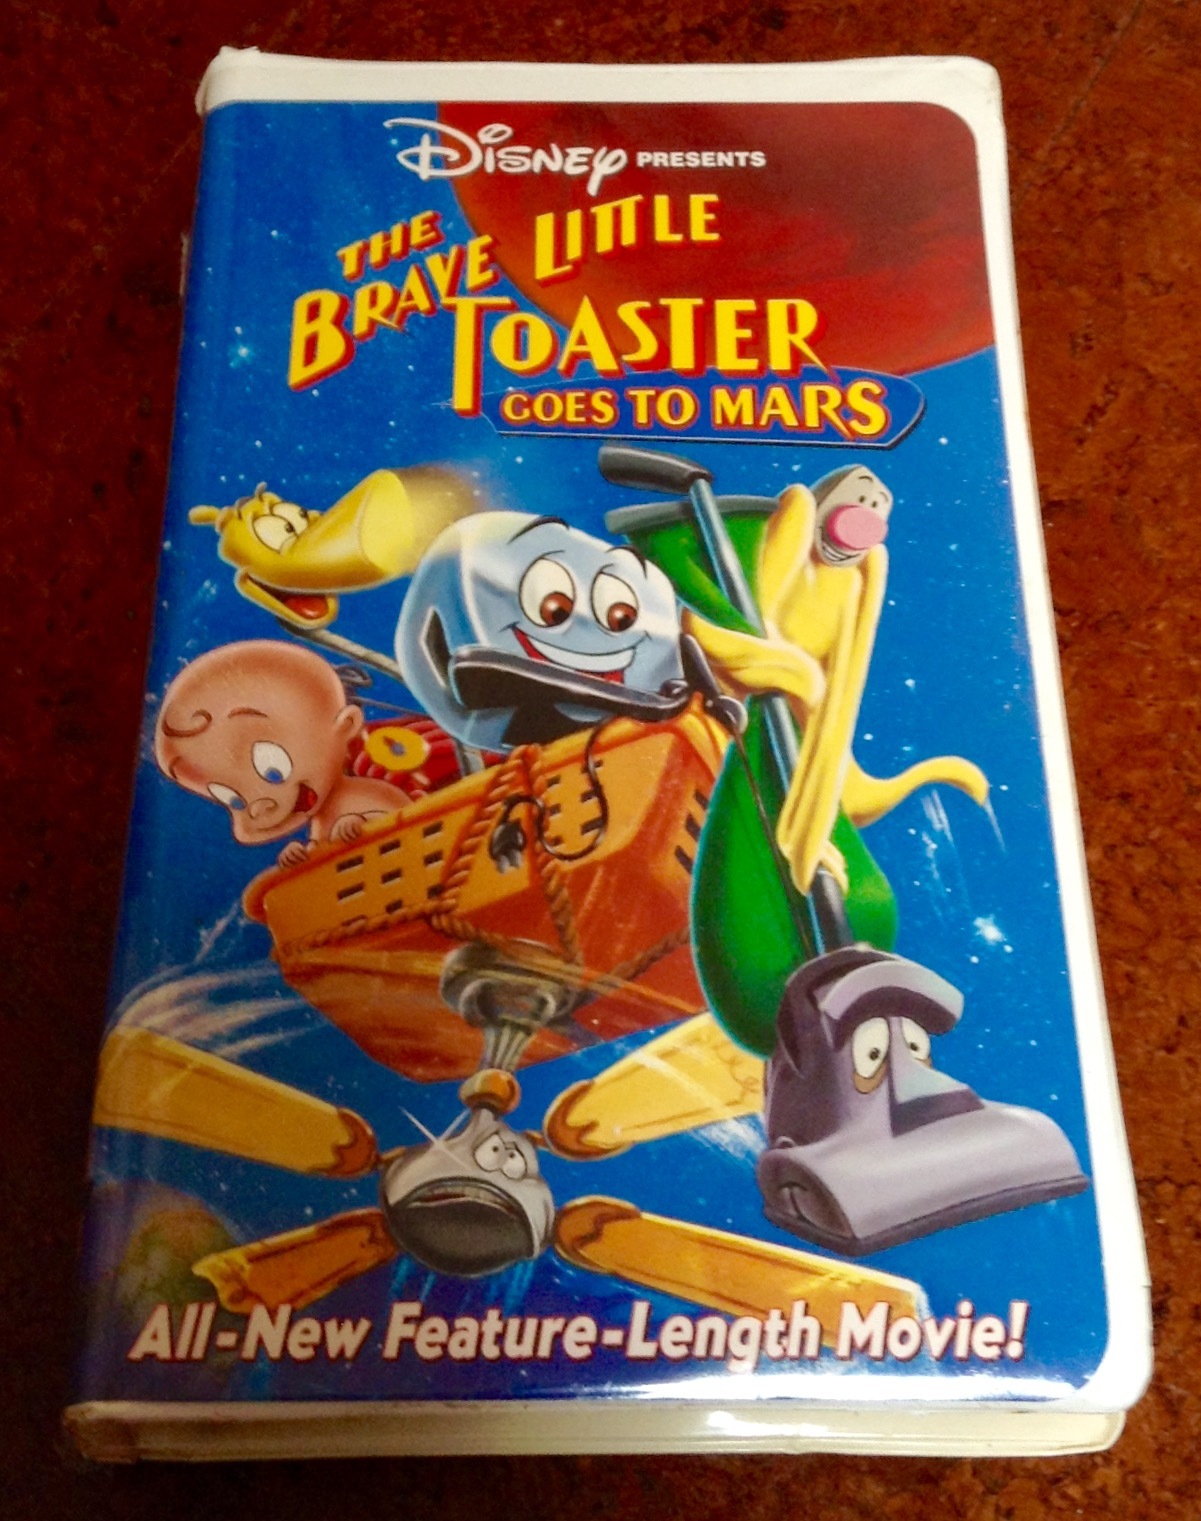 the brave little toaster goes to mars full movie online